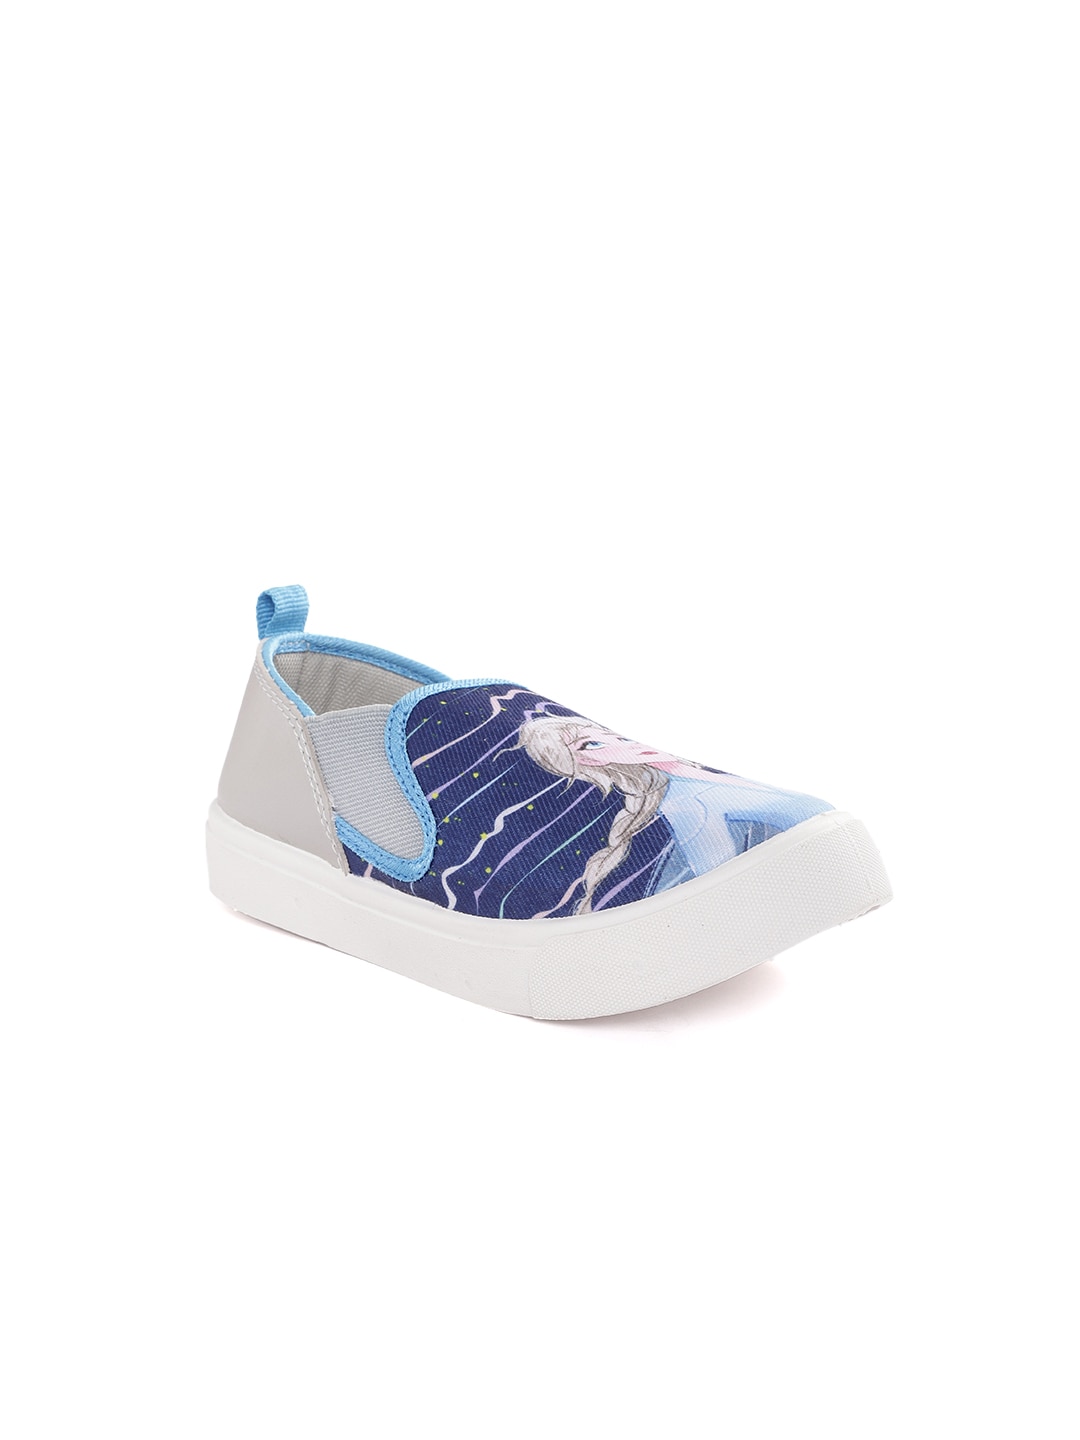 toothless Girls Blue & Grey Frozen Printed Sneakers